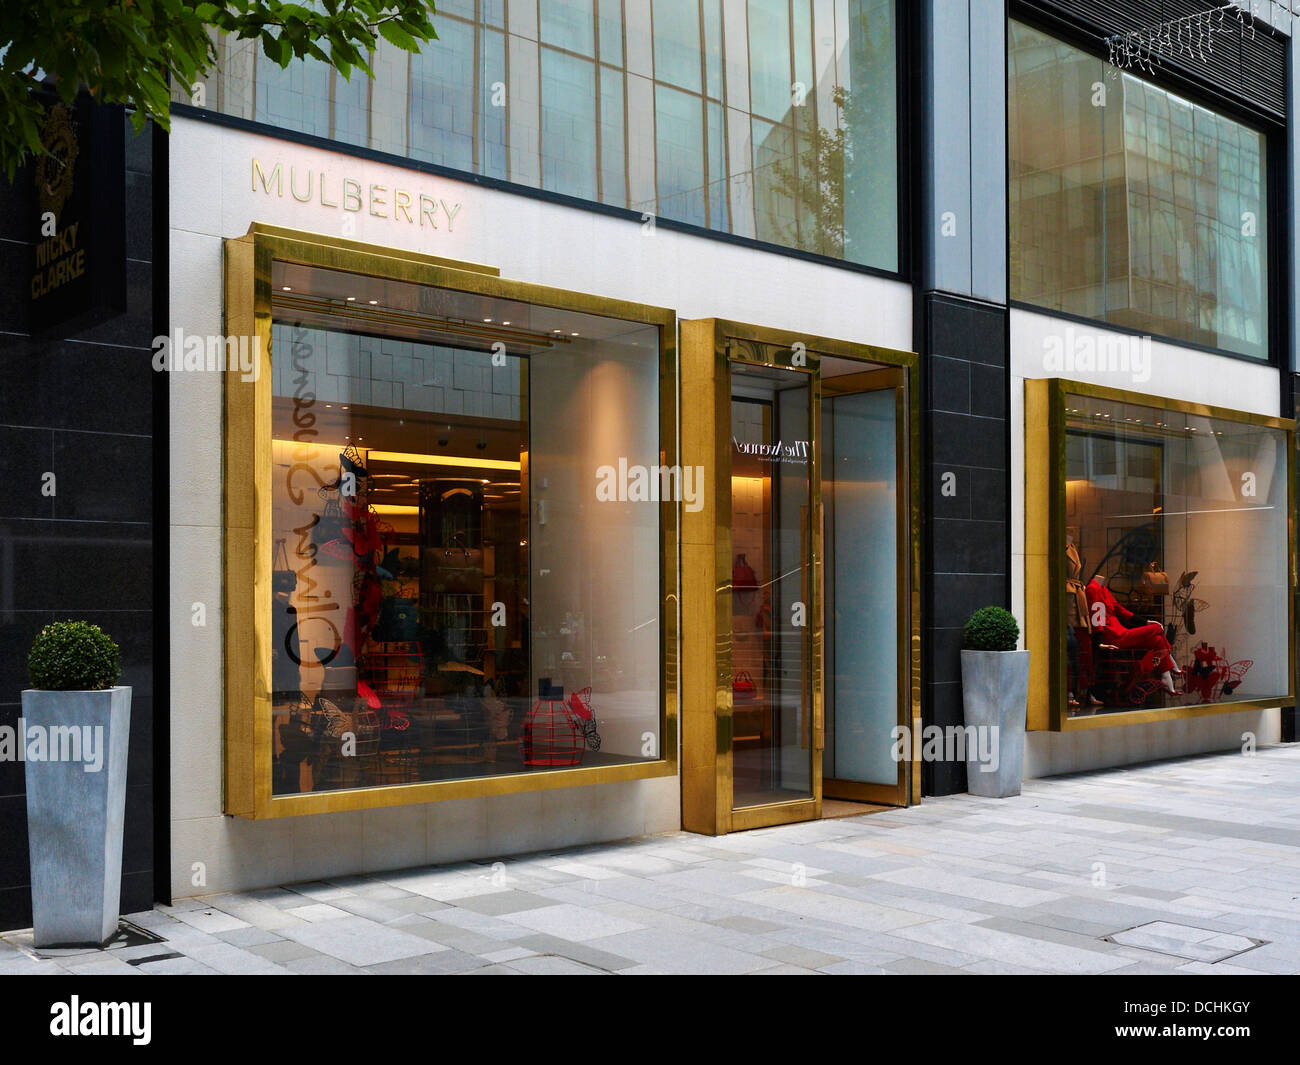 Mulberry window display in Spinningfields Manchester UK Stock Photo - Alamy